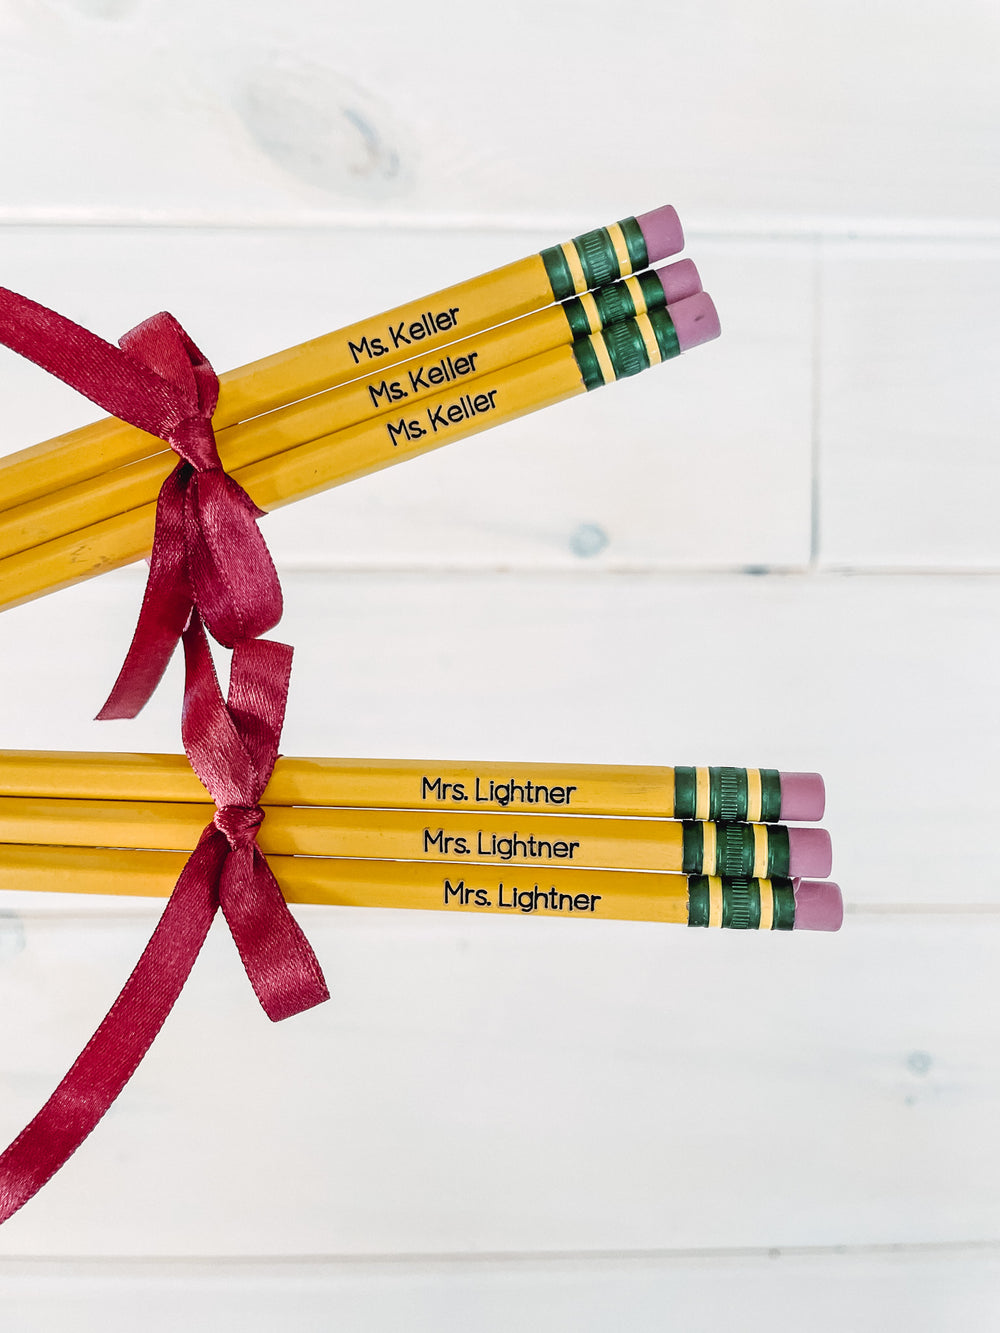 Personalized Dry Erase Marker Set for Teachers